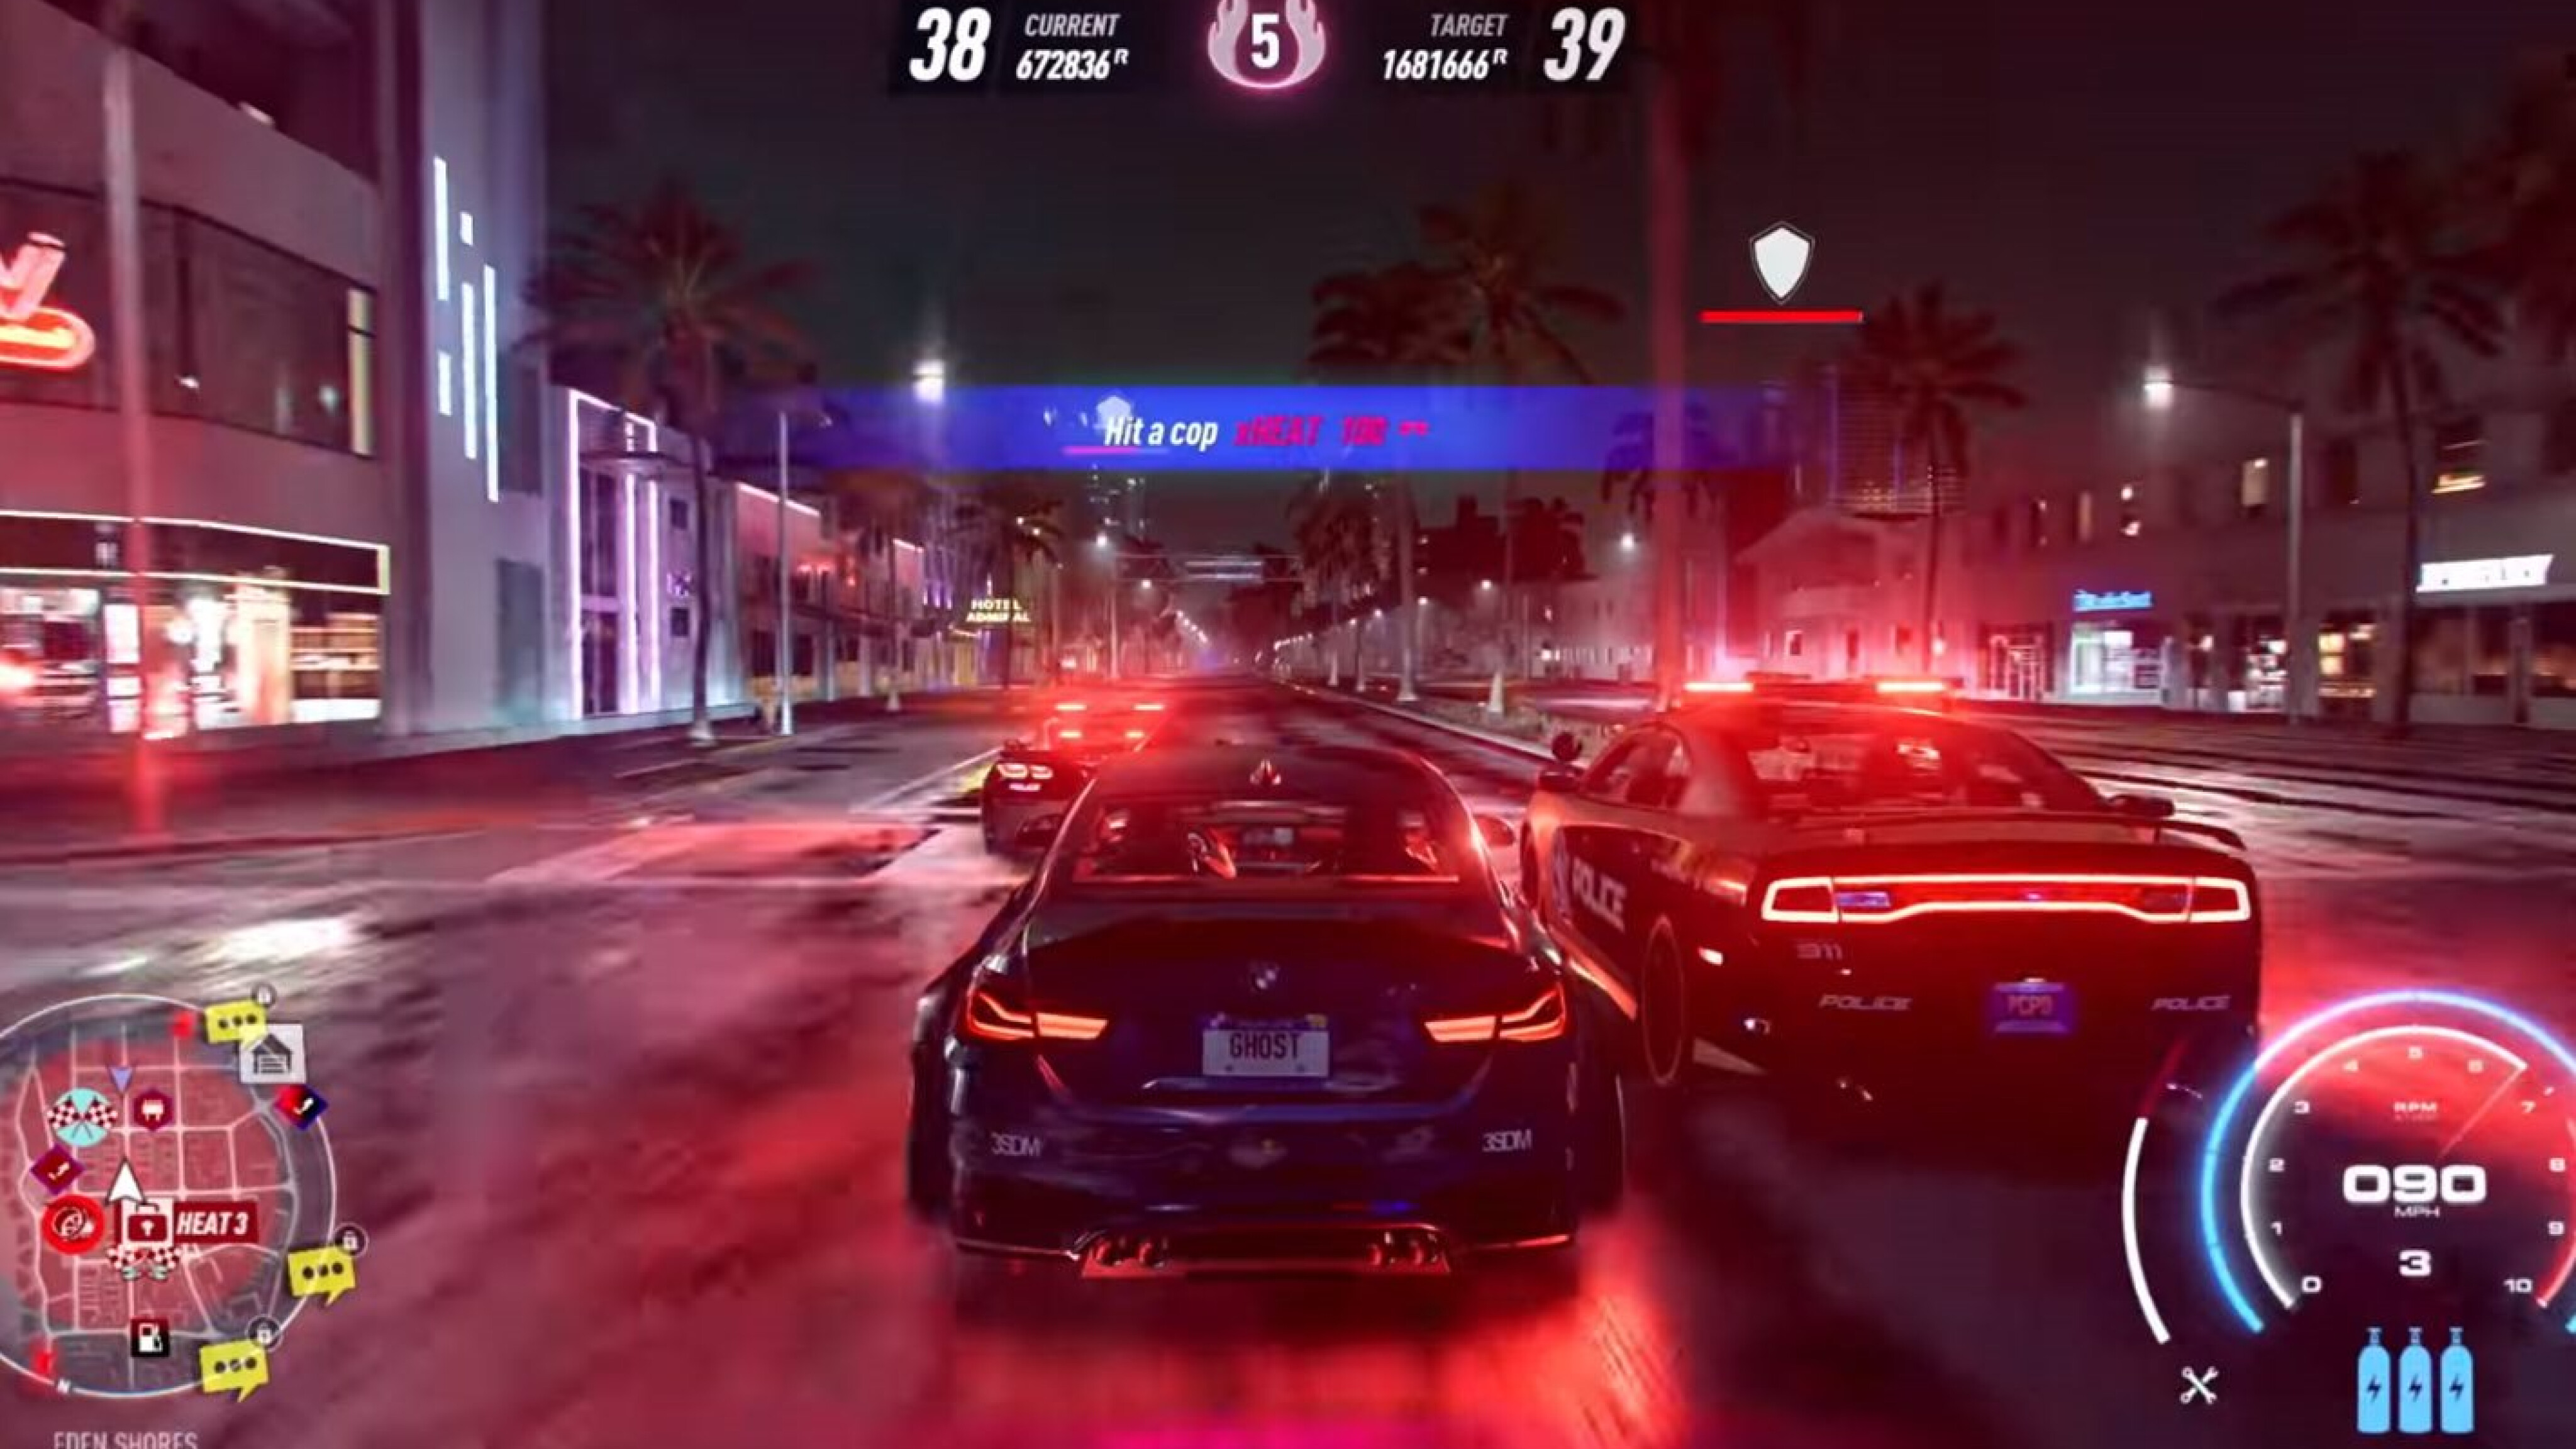 Ultimate Need For Speed Payback Car List